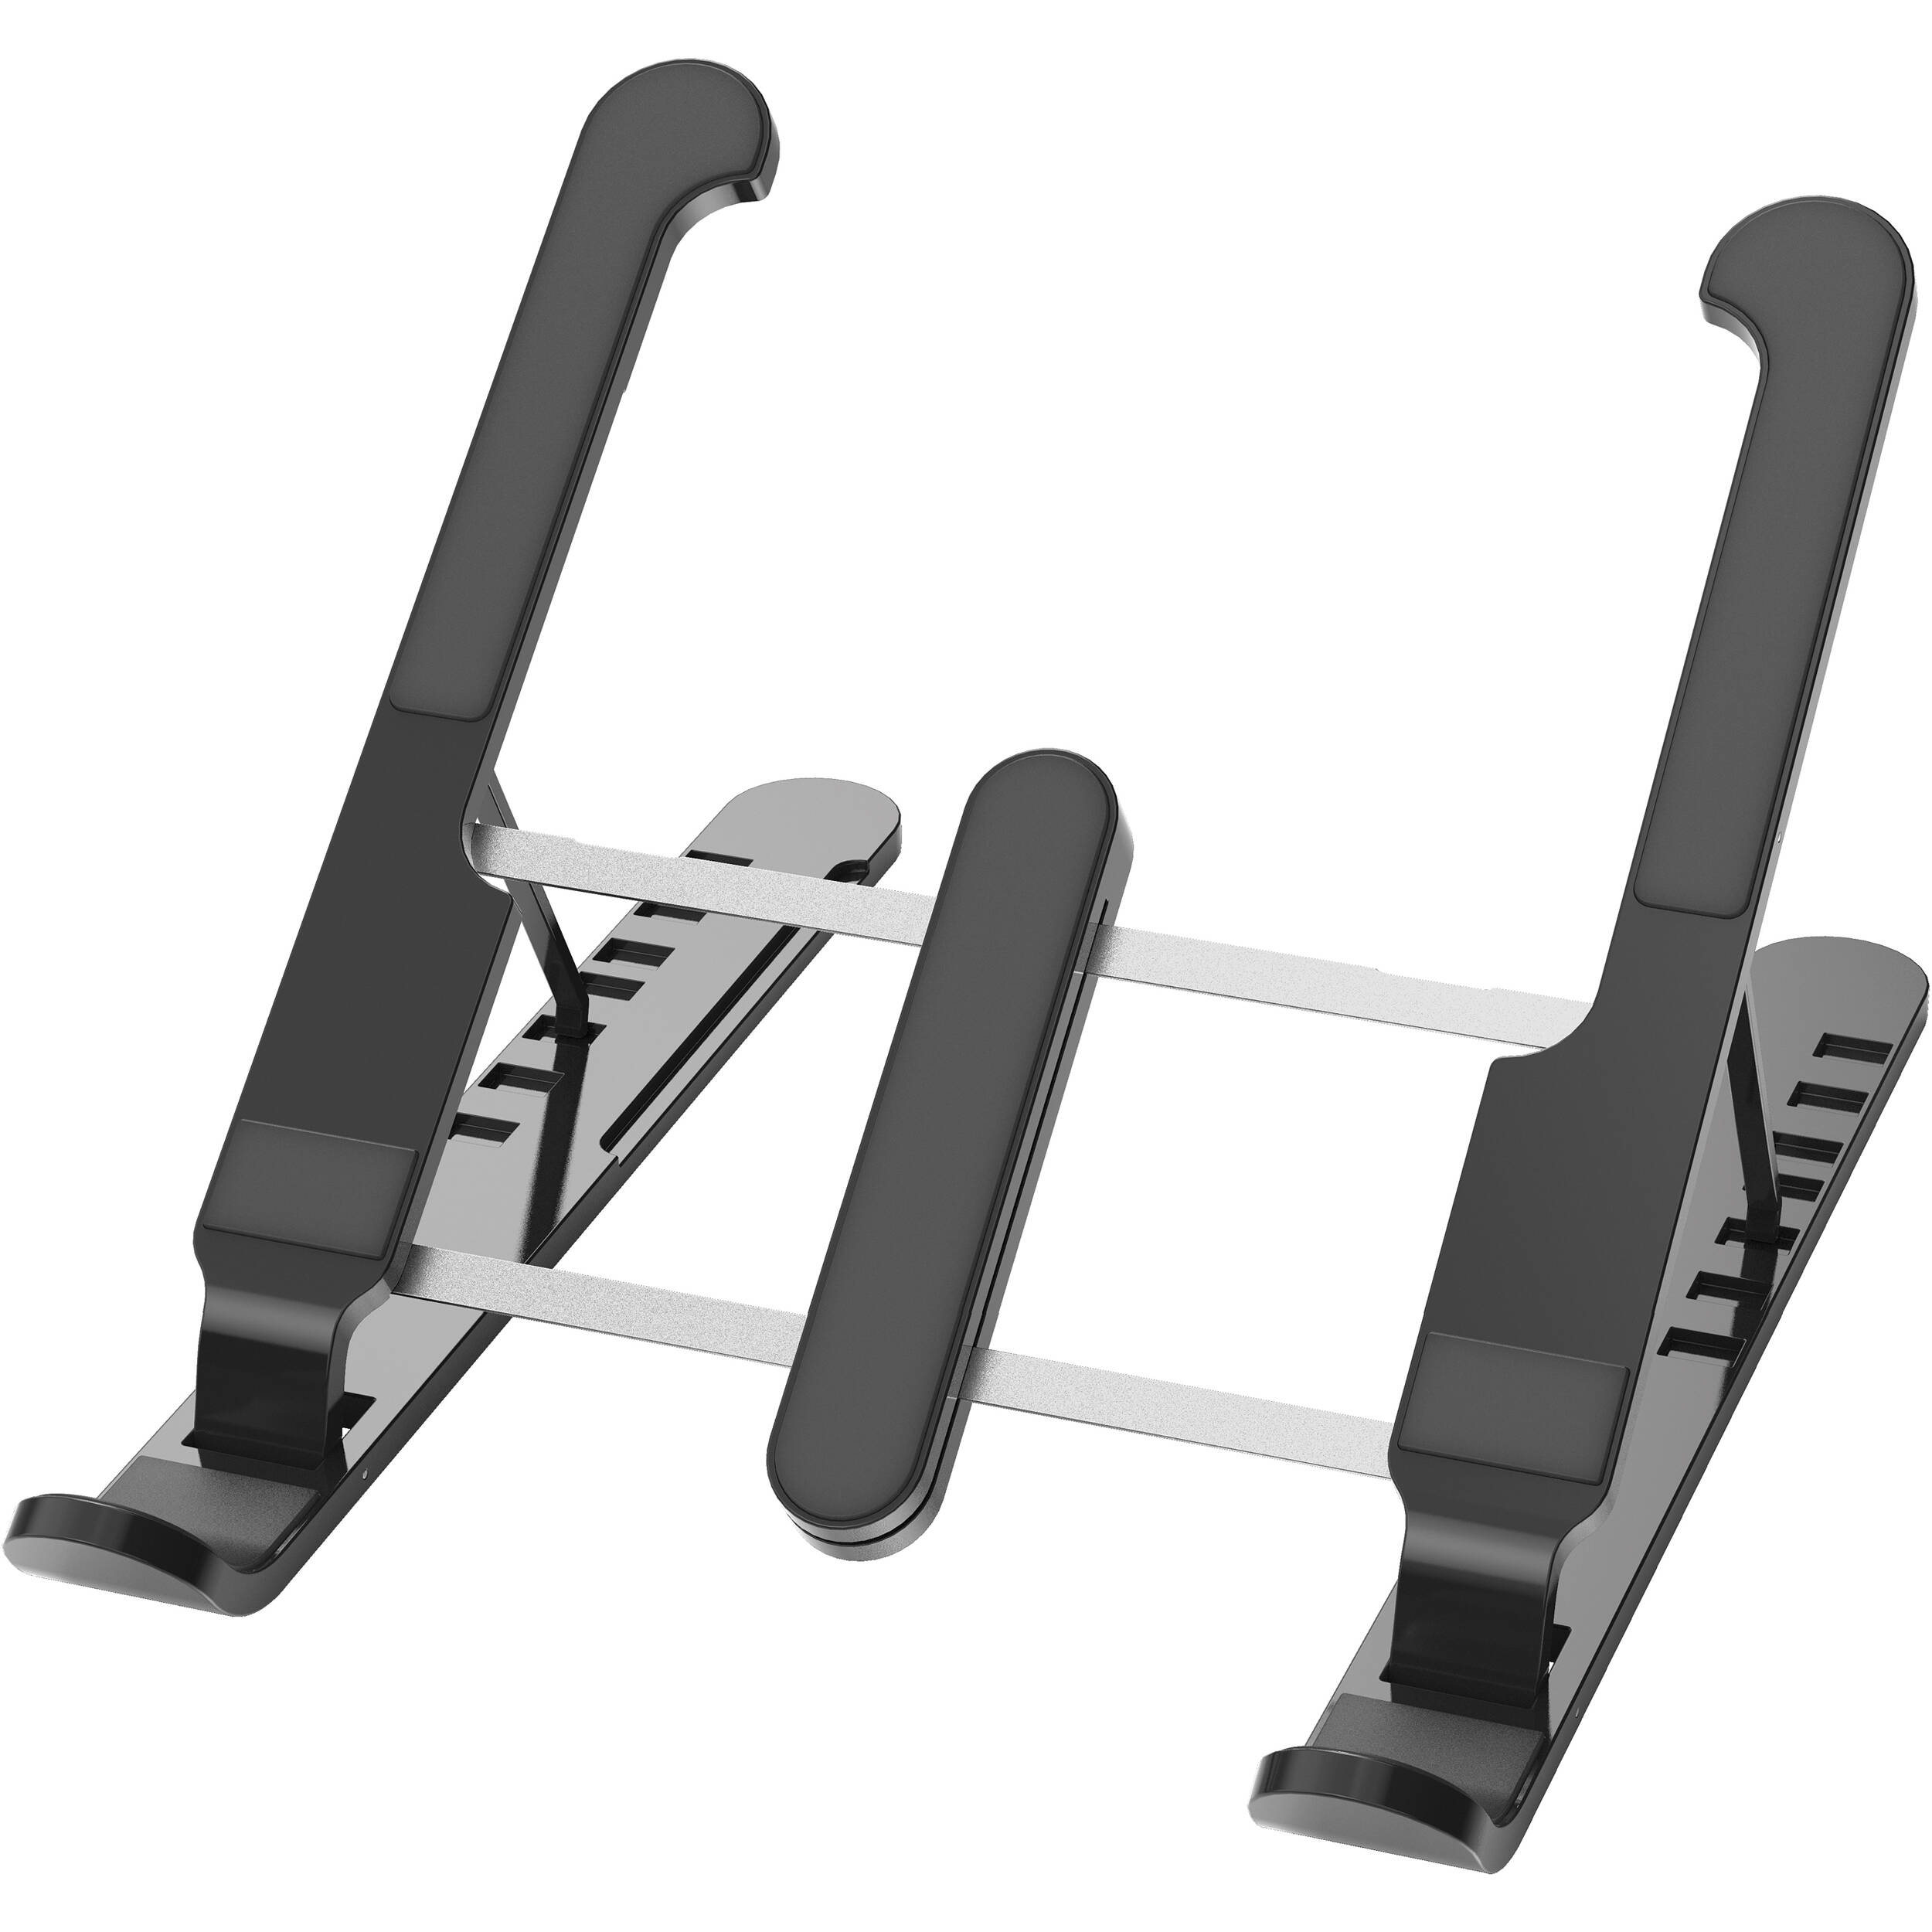 SLIDE Laptop and Tablet Stand